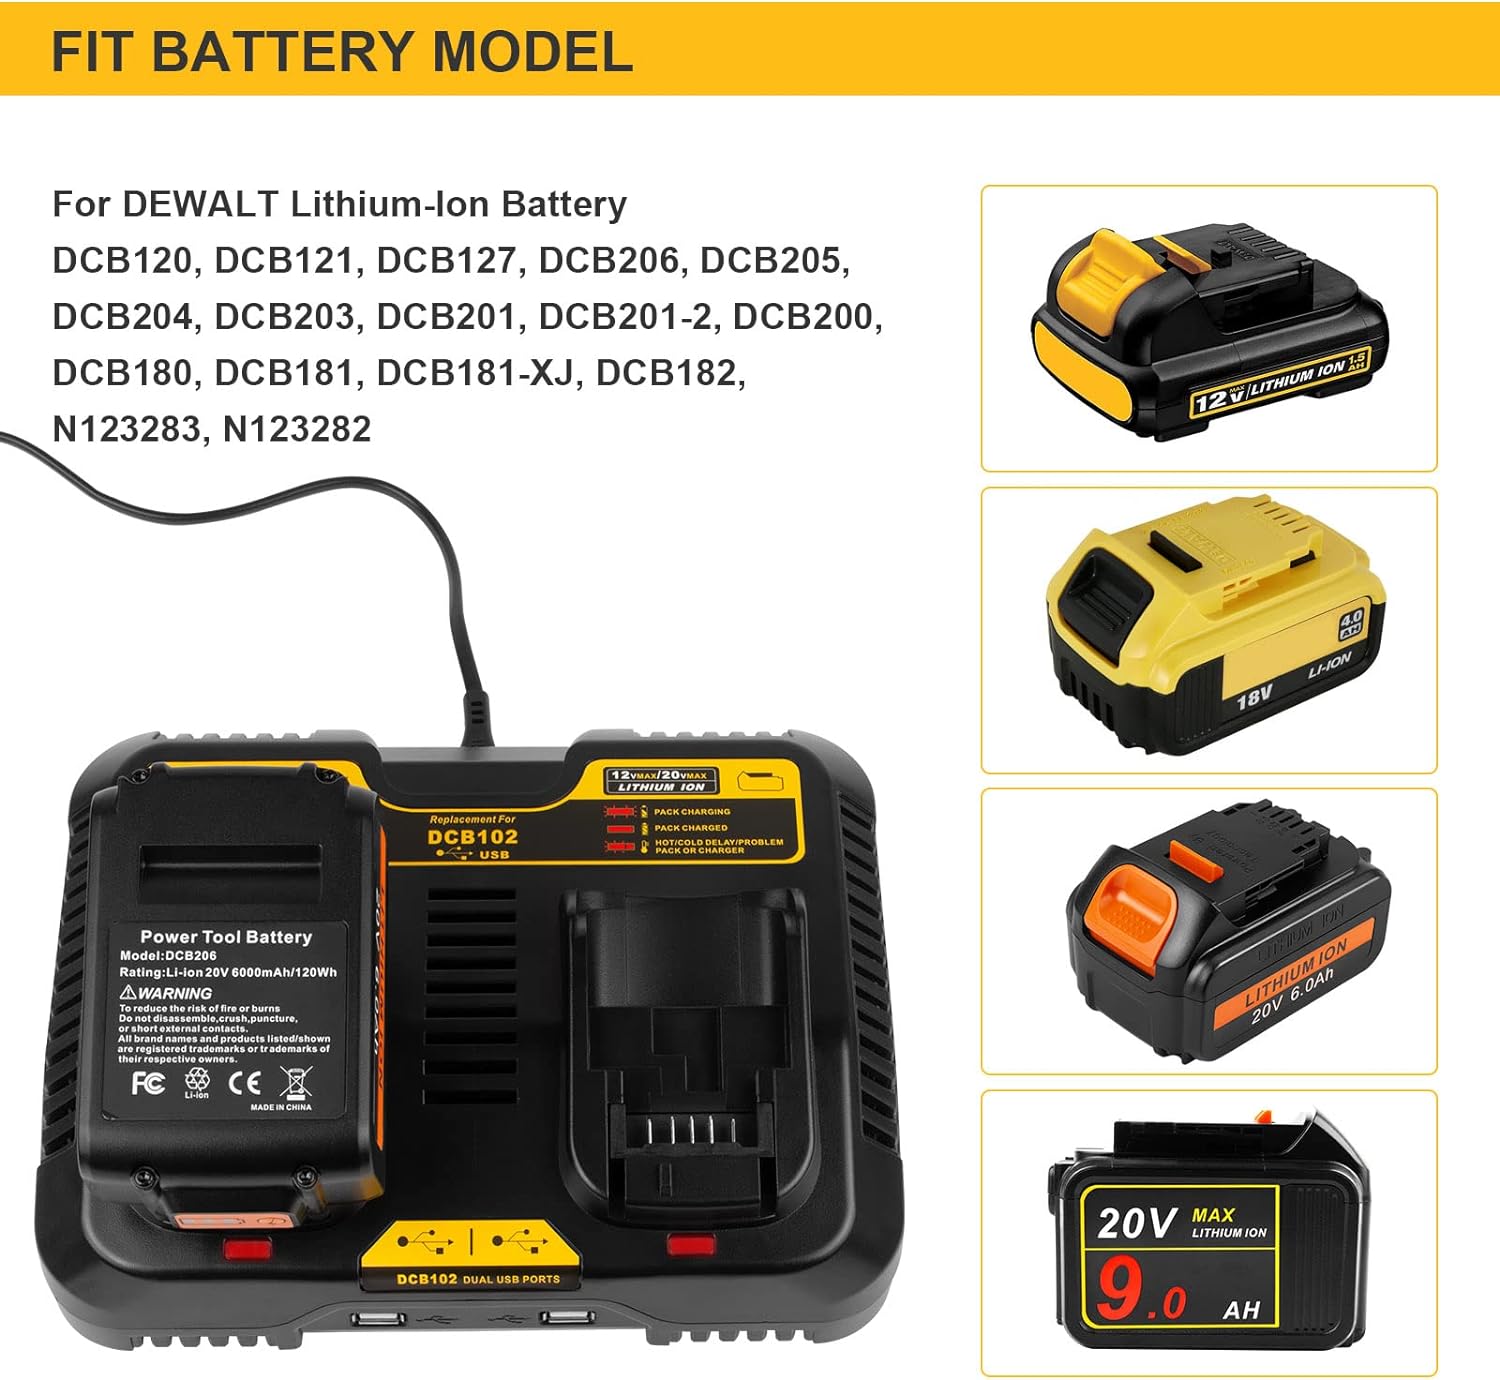 Replacement for DCB102 Dewalt Dual Charger DCB102BP 3A Fast Charger with 2 USB Ports Compatible with Dewalt 20 Volt Max - Click Image to Close